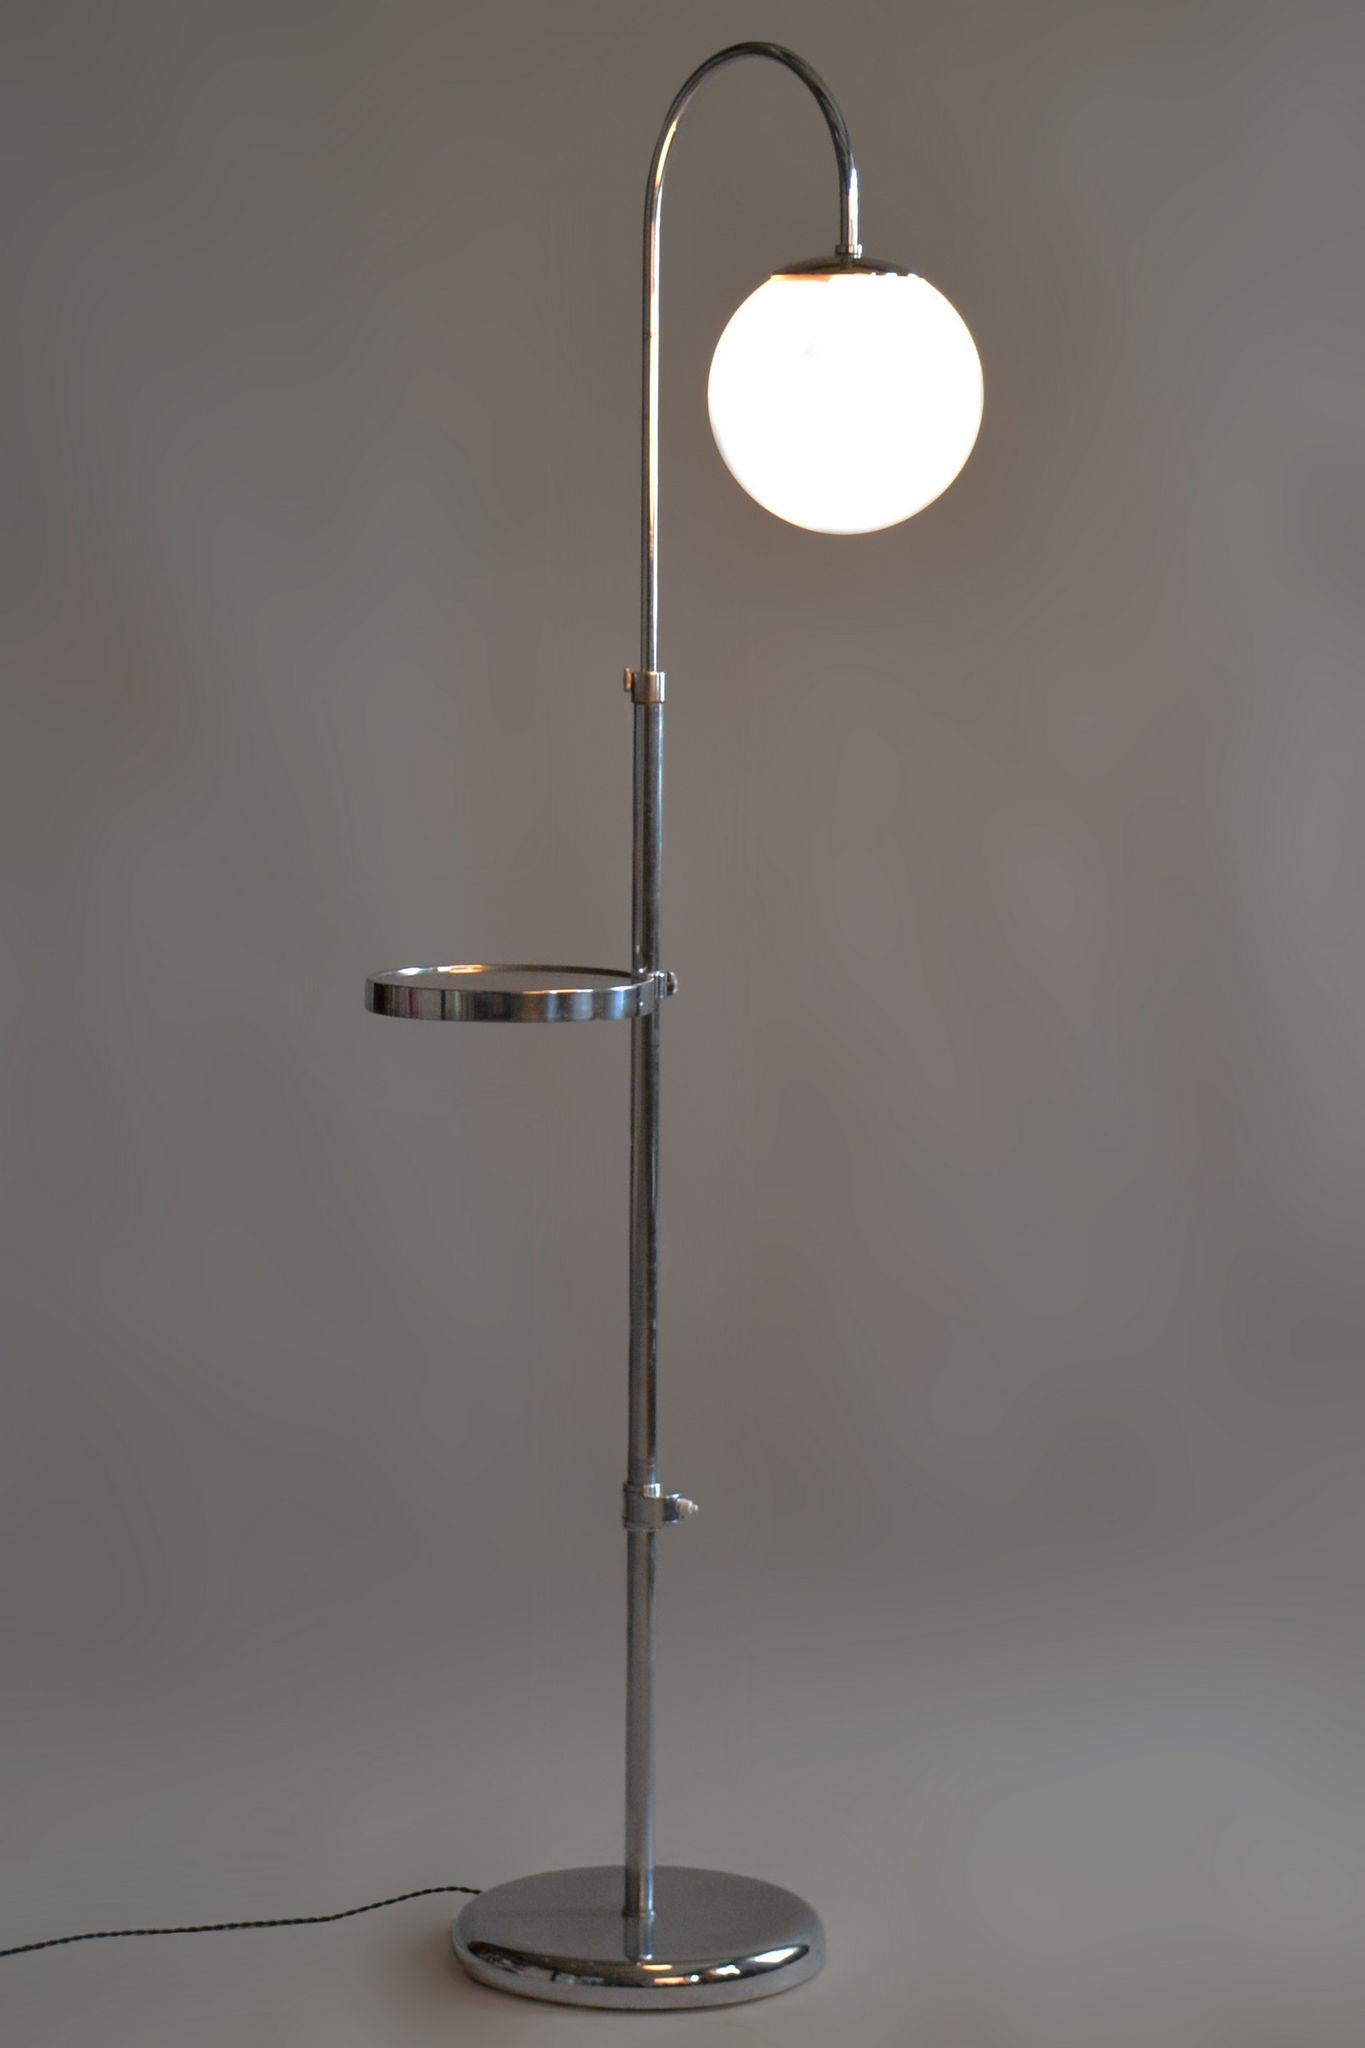 Restored Bauhaus floor lamp

Origin: Czechia 
Period: 1930-1939
Material: Chrome-plated steel, milk glass

Adjustable lamp height (167 - 185 cm).

Adjustable shelf height.

The chrome parts have been cleaned and professionally restored. 			

This